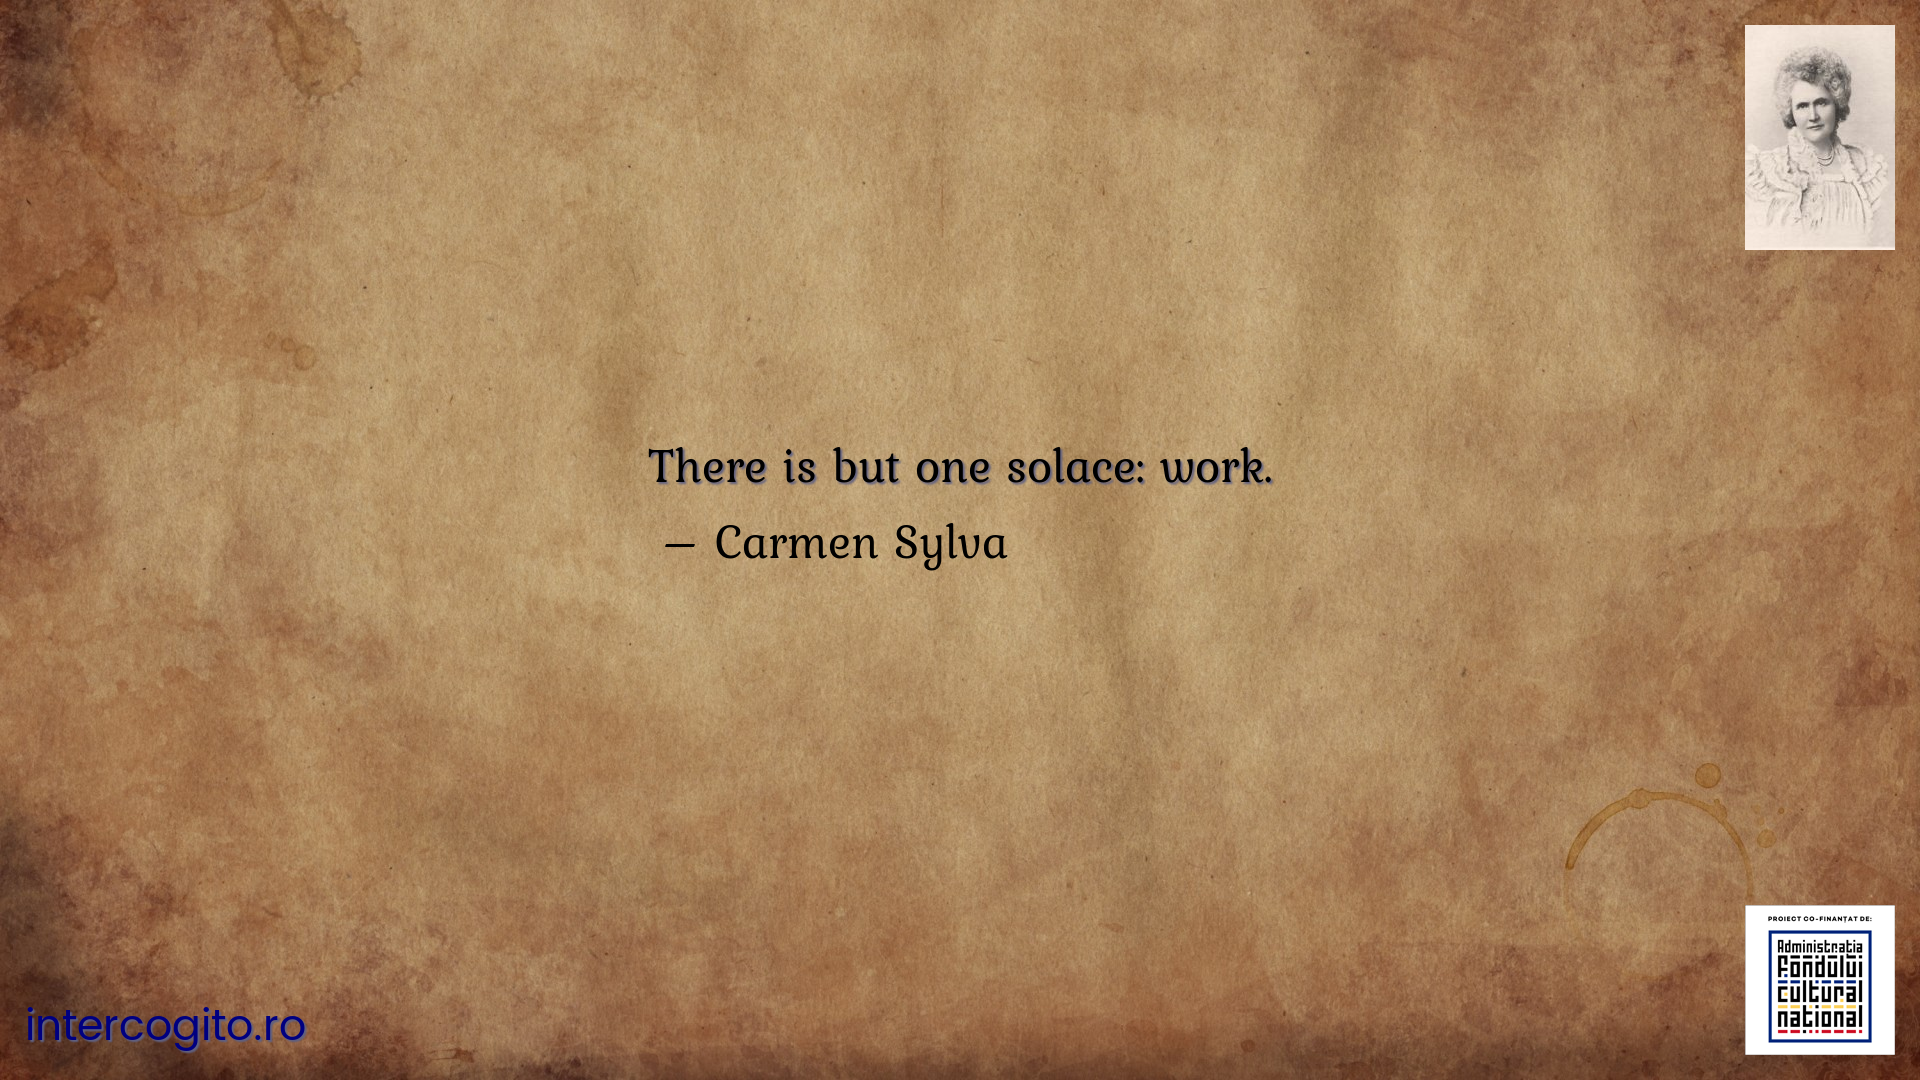 There is but one solace: work.